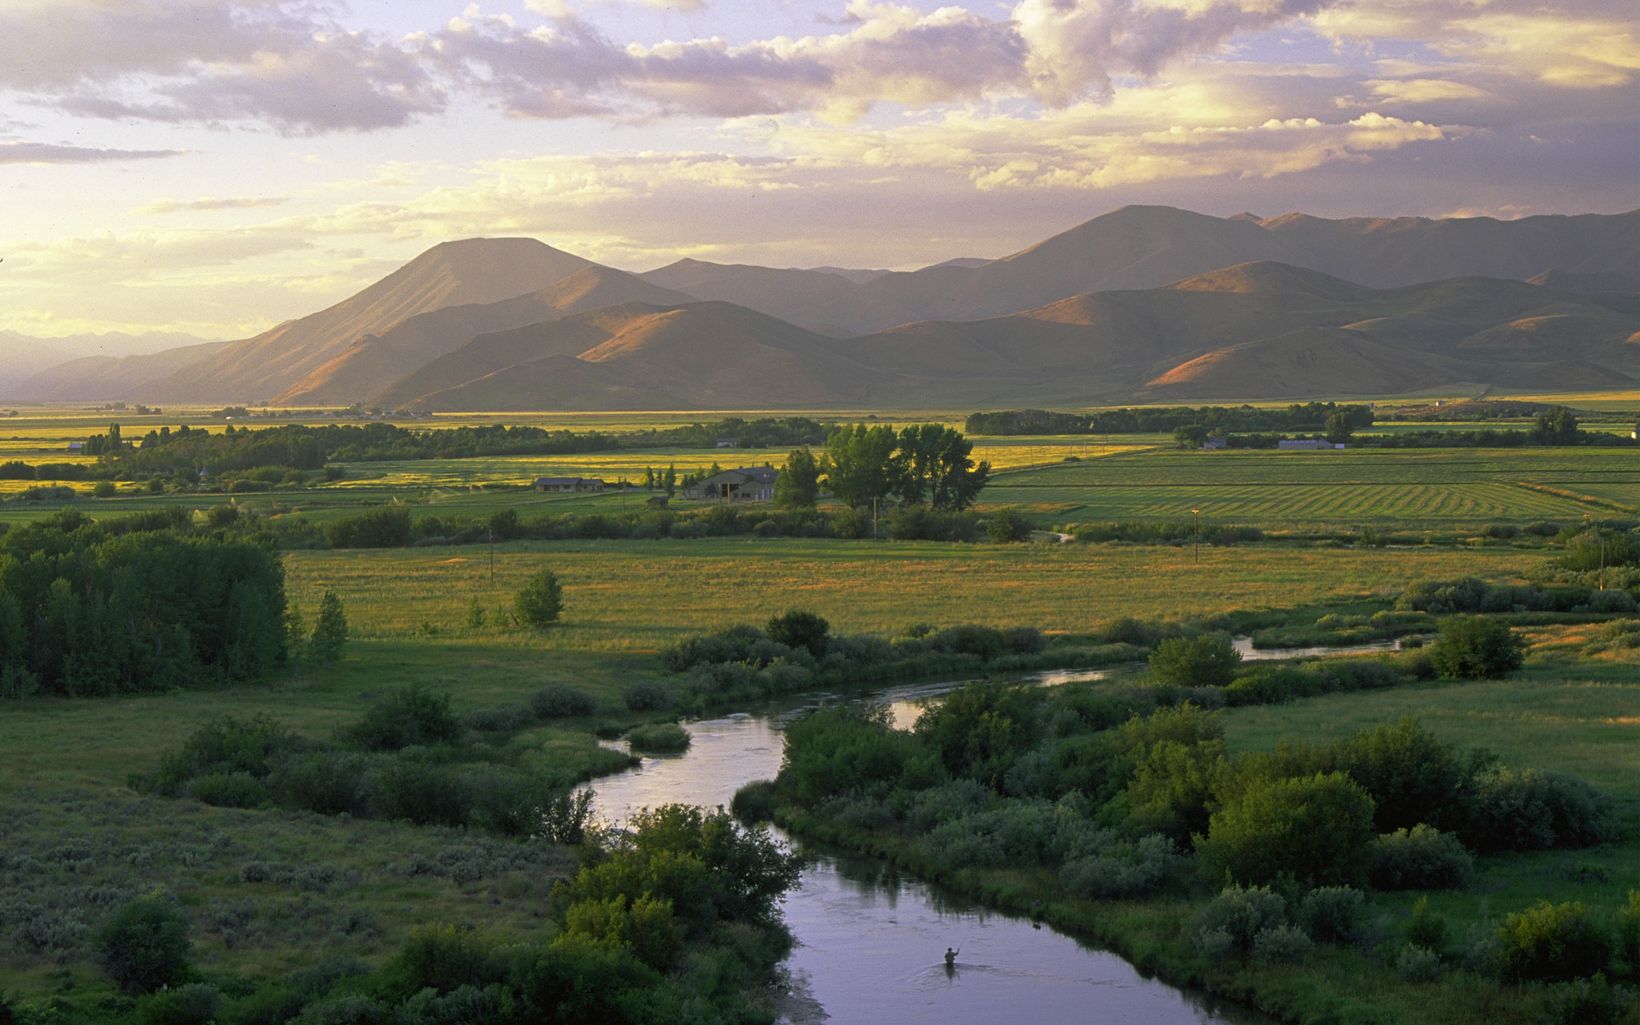 An angler stands in Silver Creek with fields and mountains in the distance.